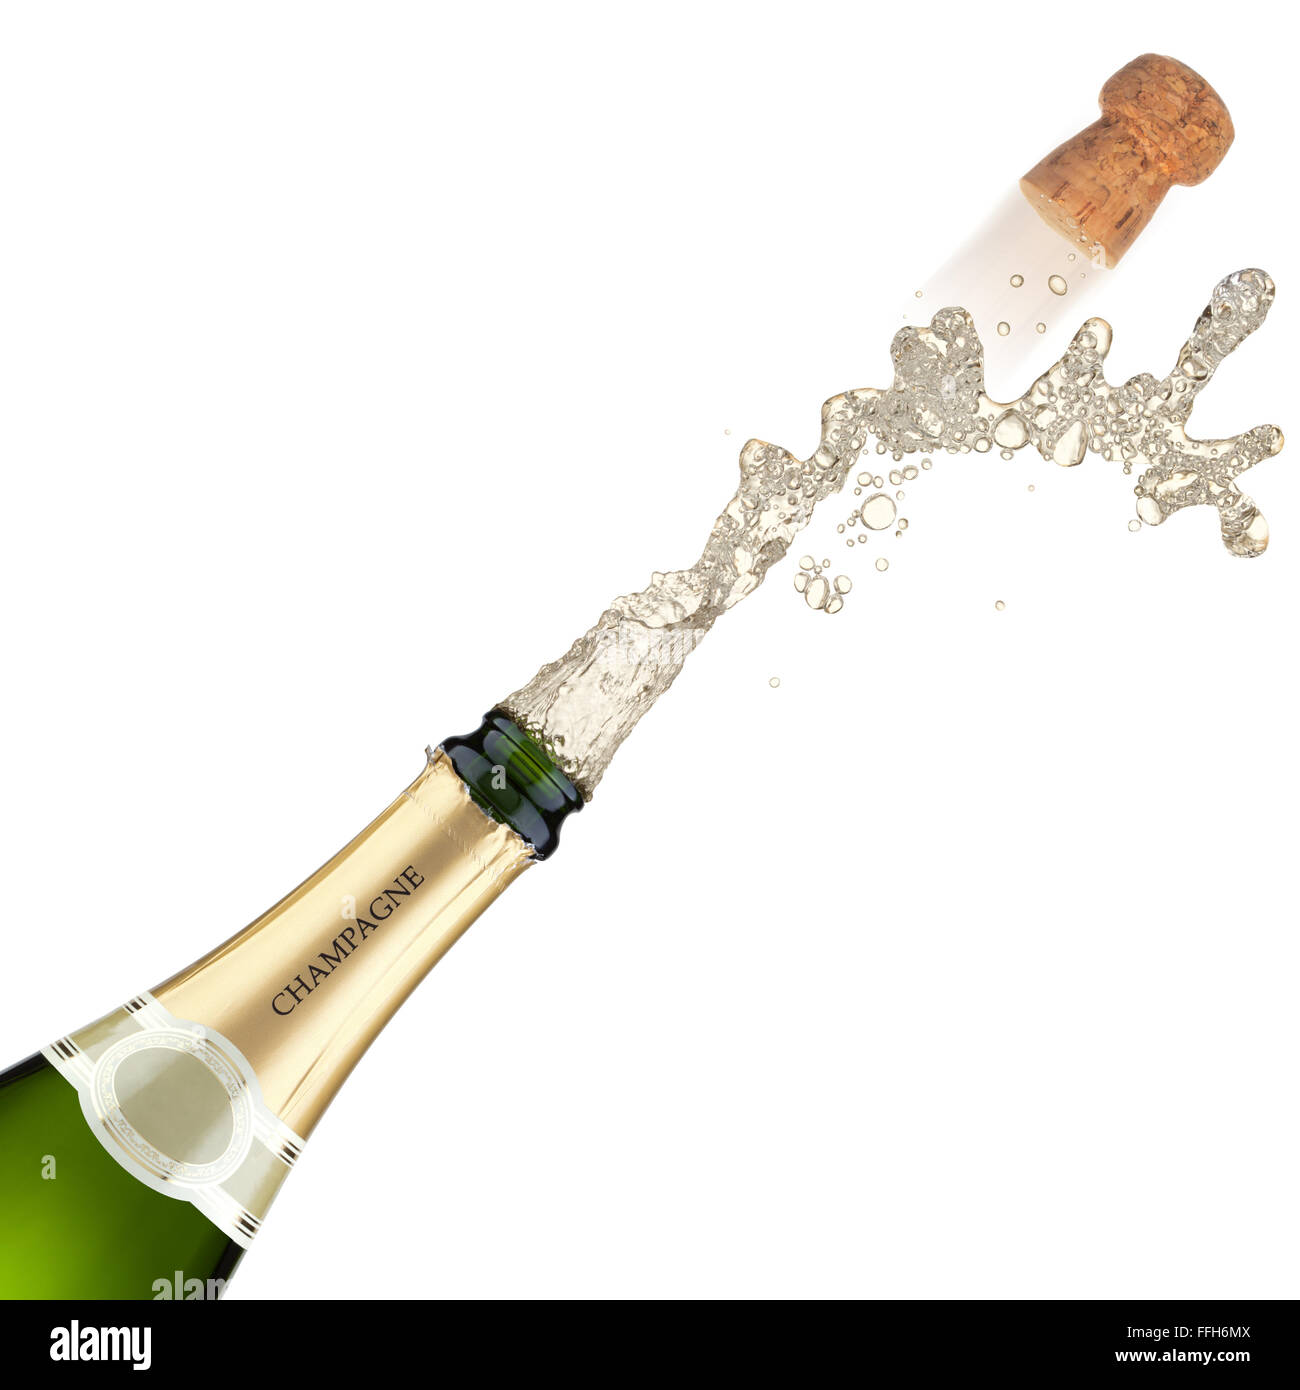 Champagne bottle explosion, isolated on the white background. Stock Photo